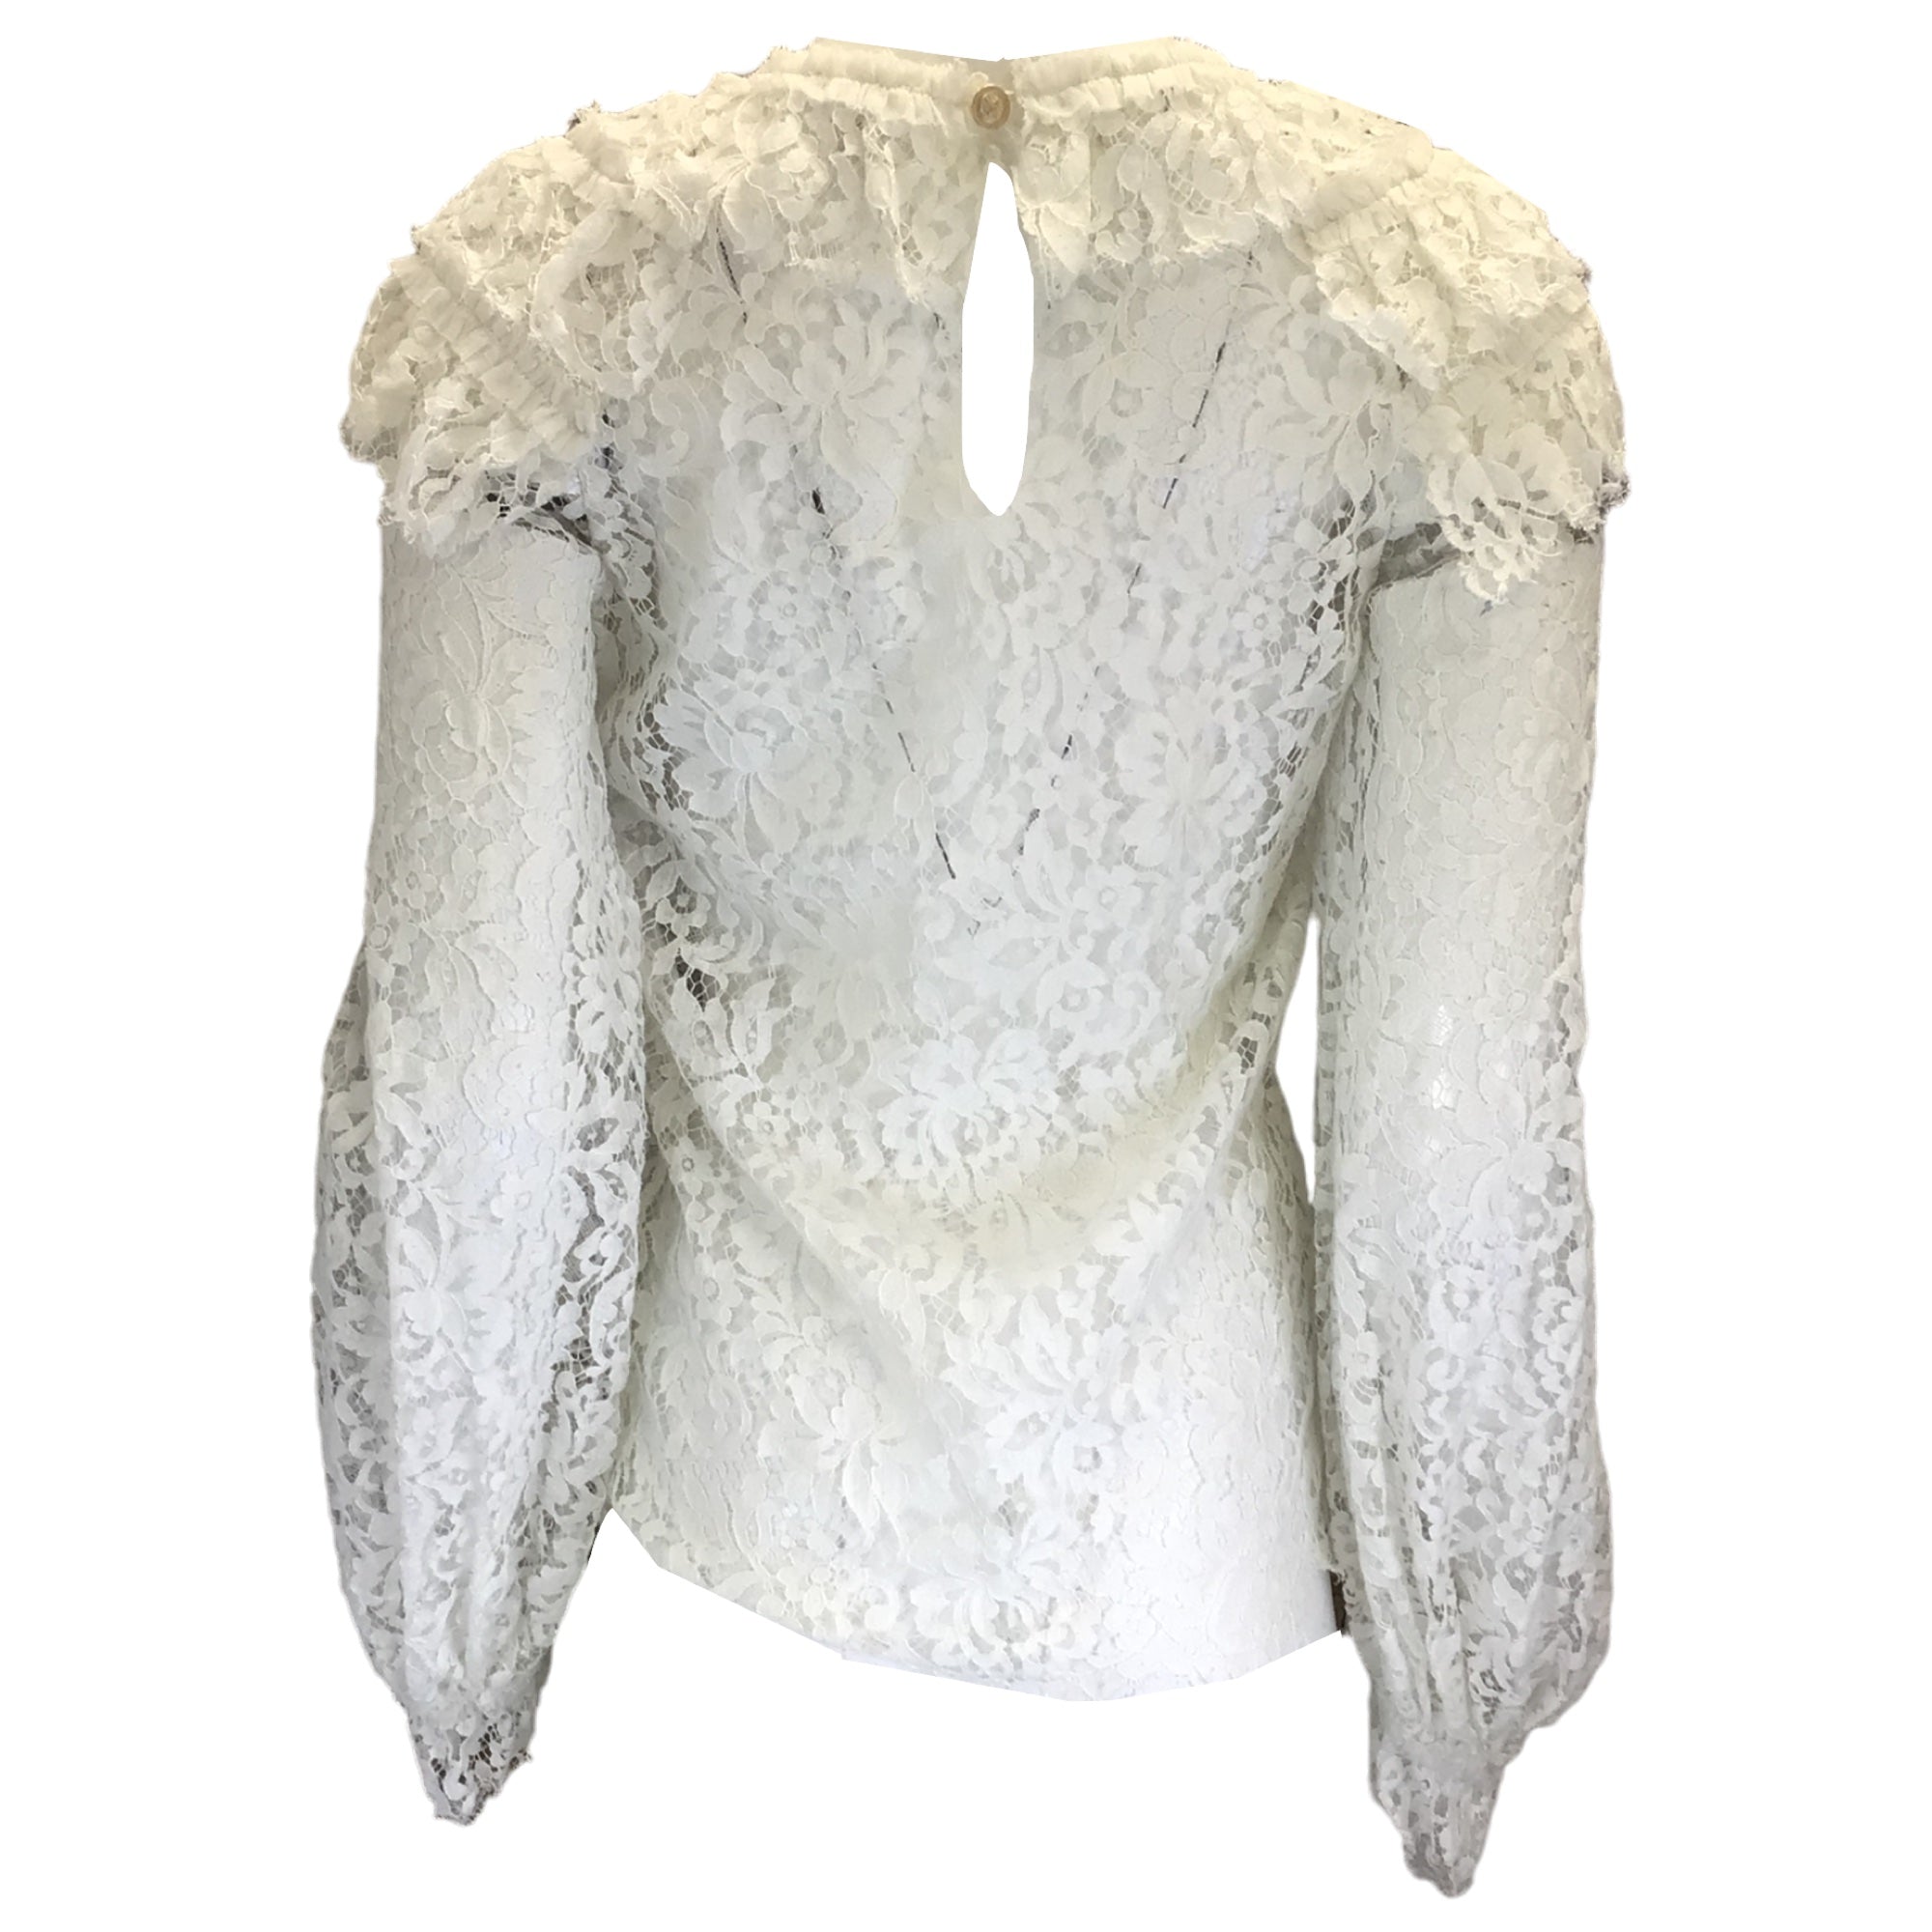 Chanel White Long Sleeved Lace Blouse